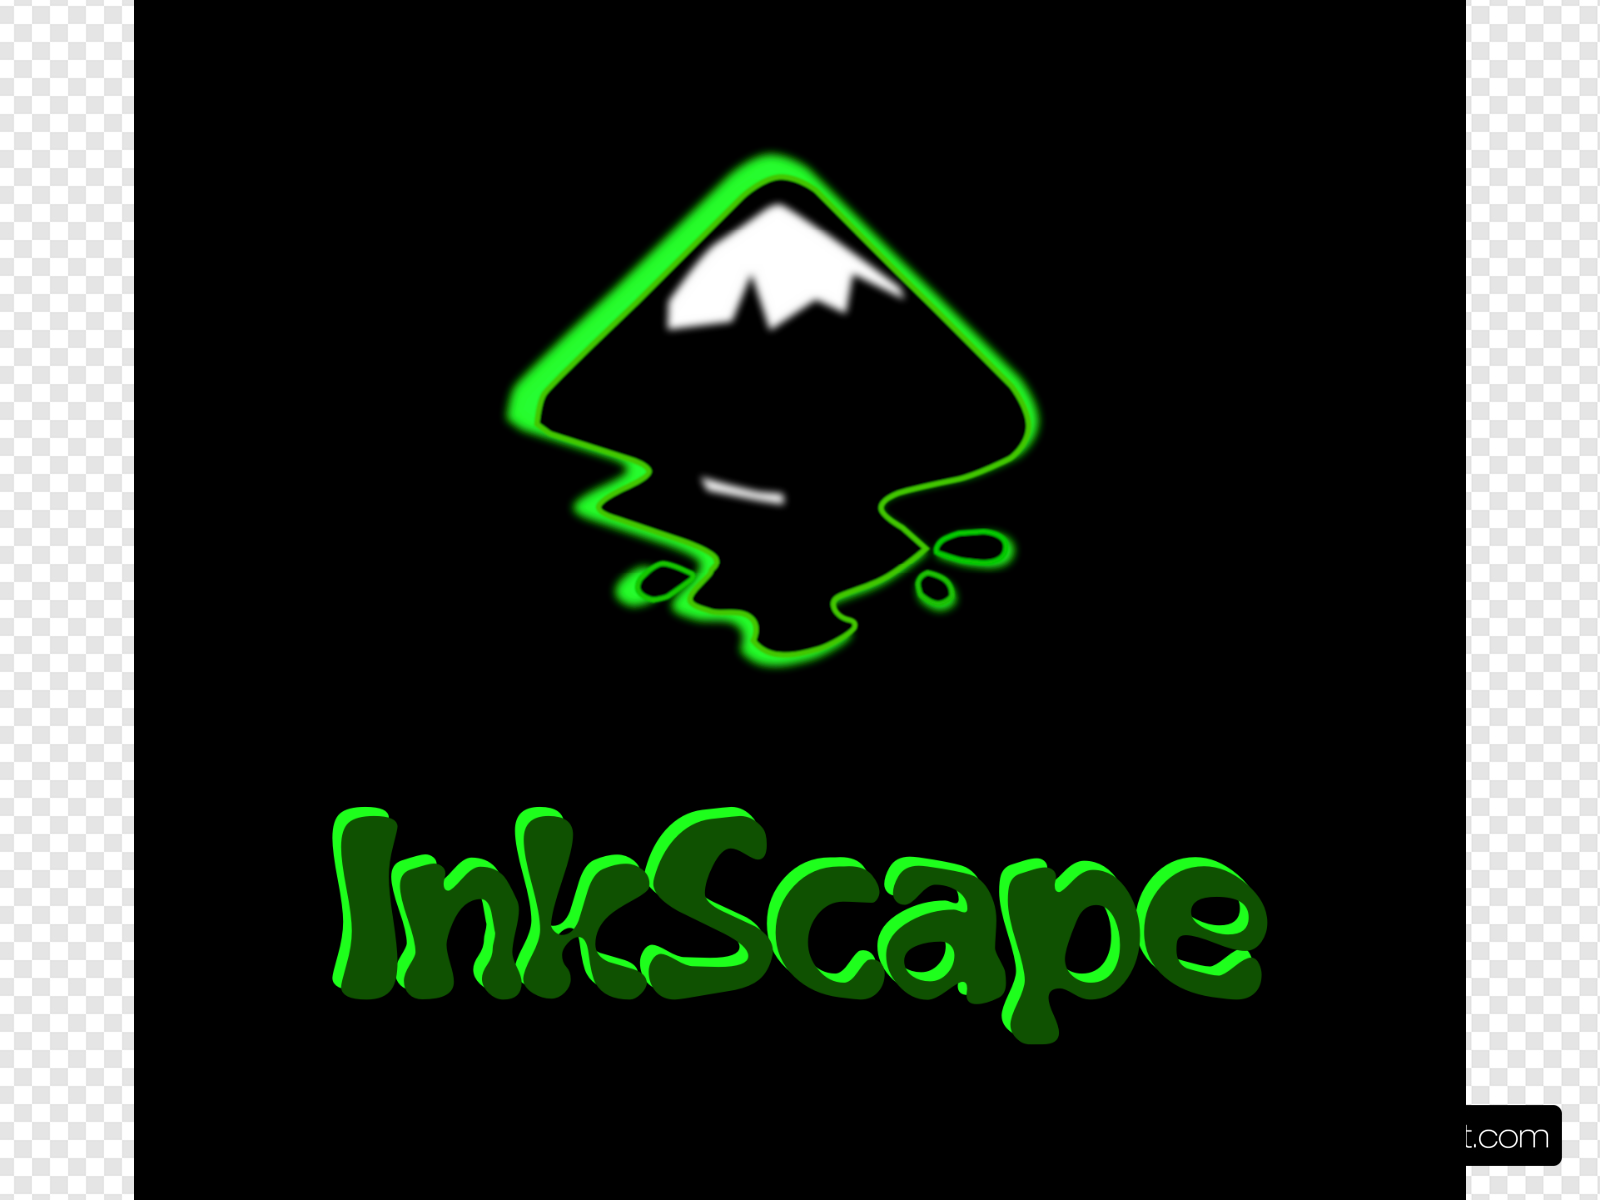 Inkscape Black And Green Clip art, Icon and SVG